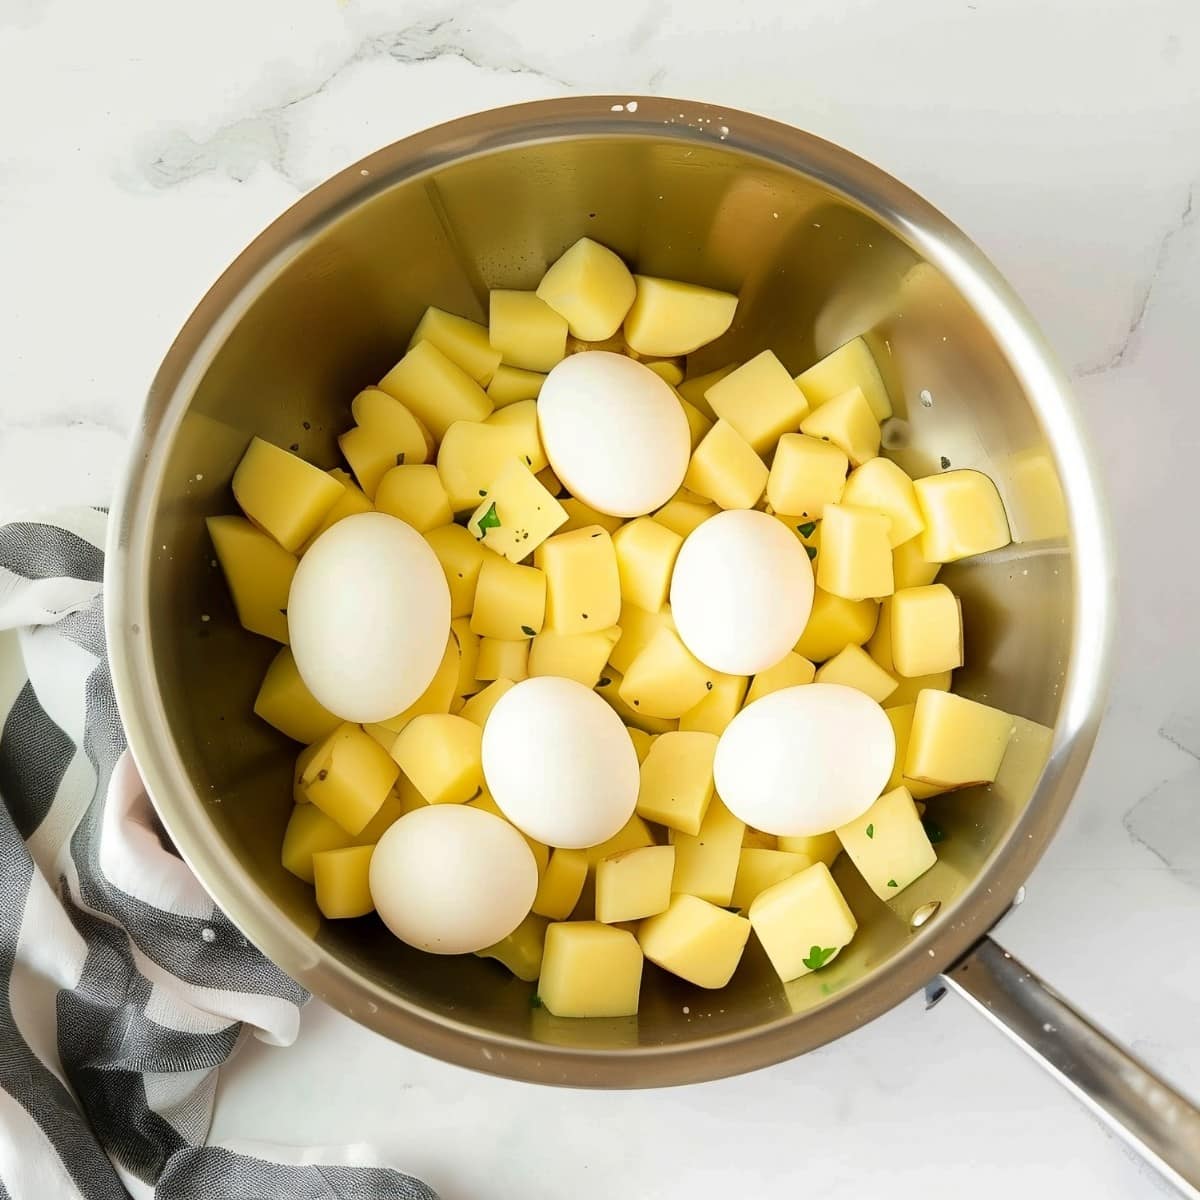 Cubed potatoes and eggs in a pan on a marble surface